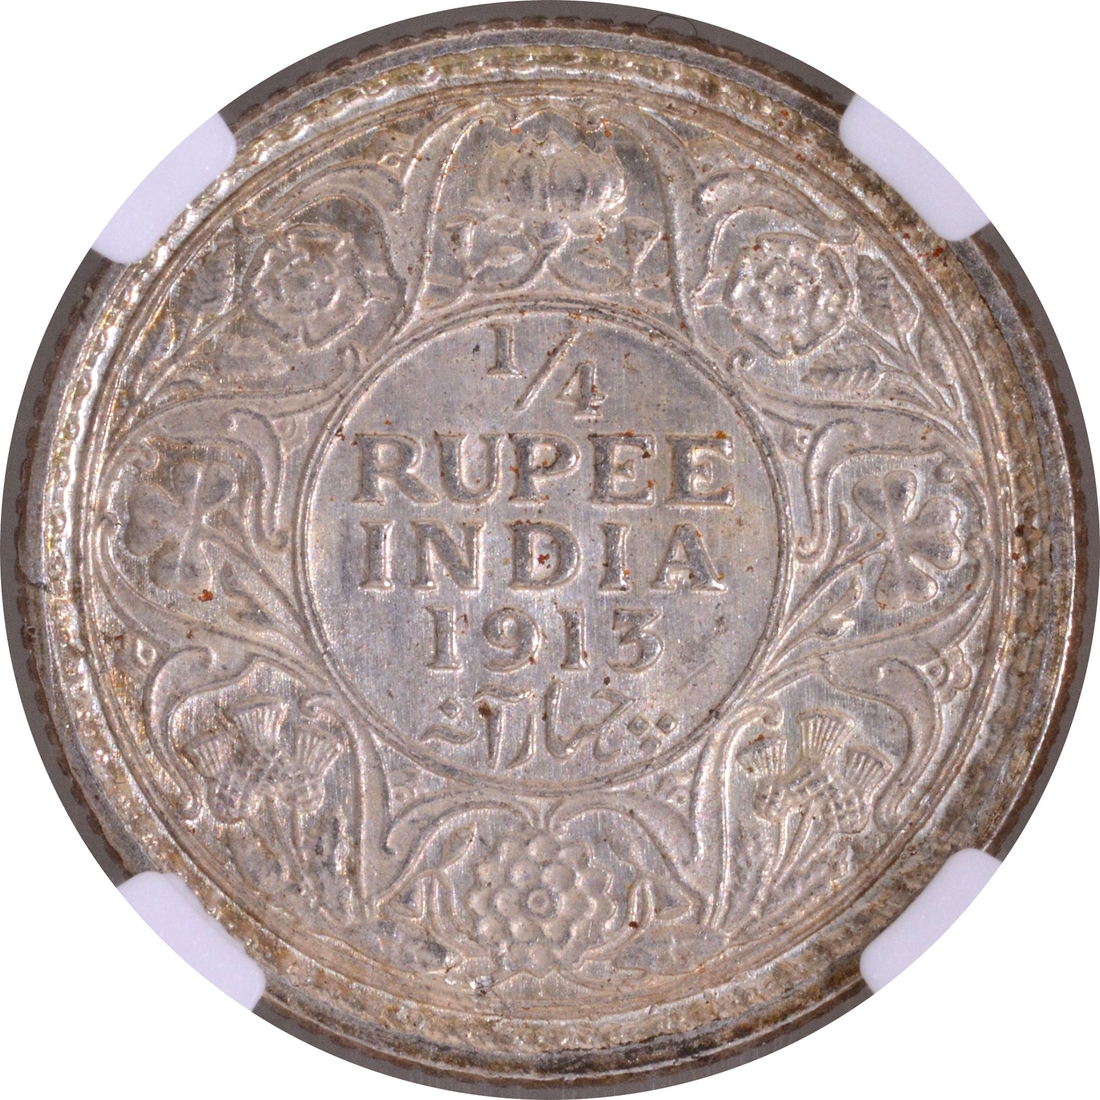 NGC MS 65 Graded Silver Quarter Rupee Coin of King George V of Calcutta Mint of 1913.